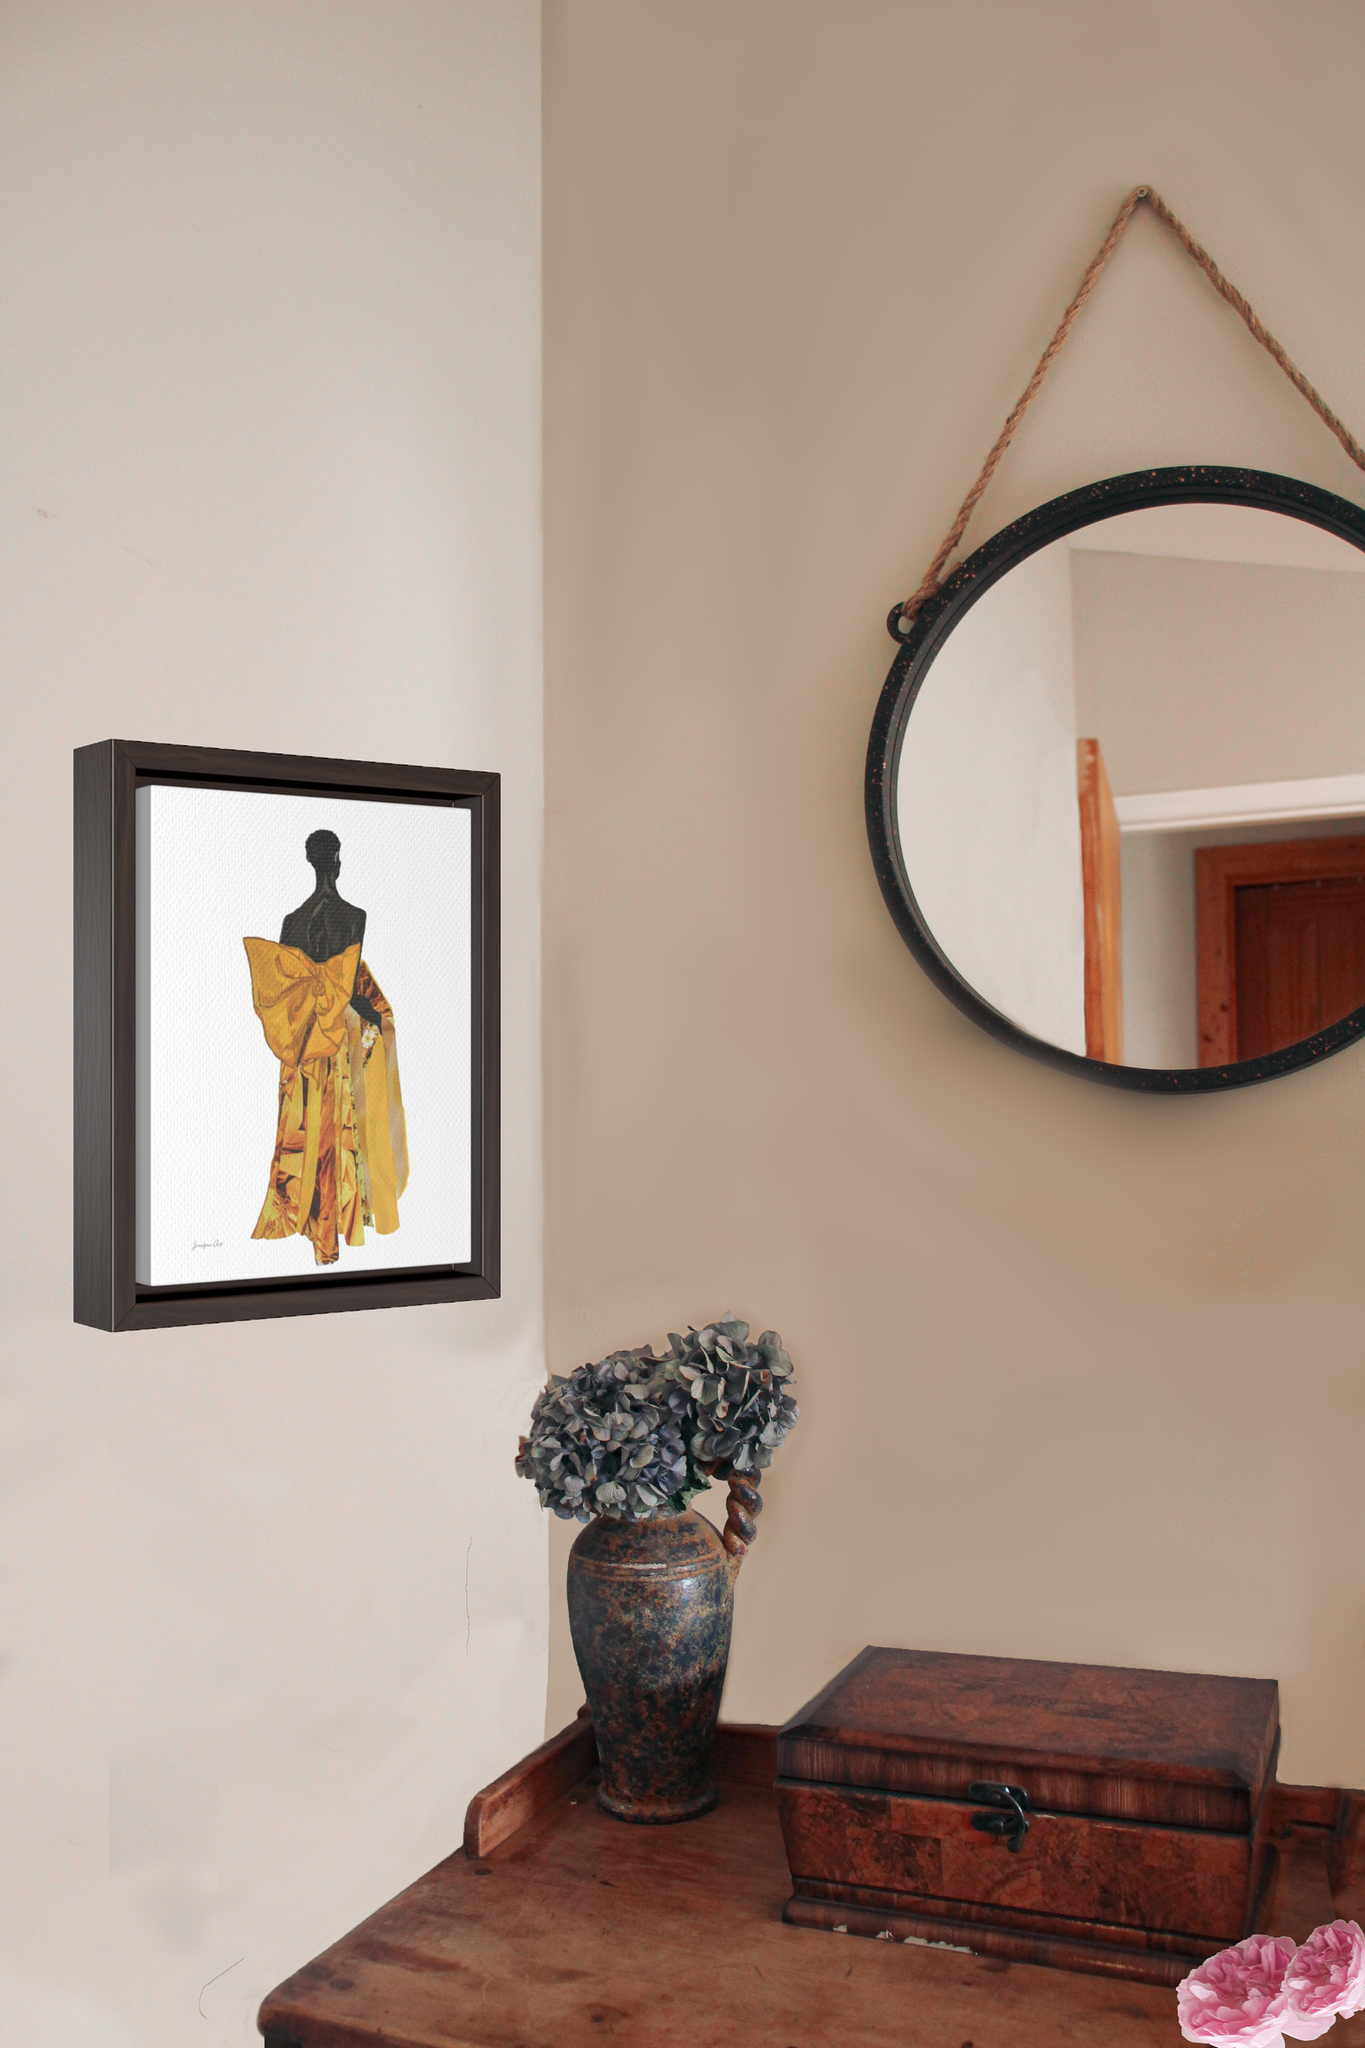 A framed canvas featuring a fashion illustration of Black model Akiima Ajak wearing a yellow Valentino gown with a large bow on the back, and a white background, hanging on a wall above a wood desk with a vase of flowers